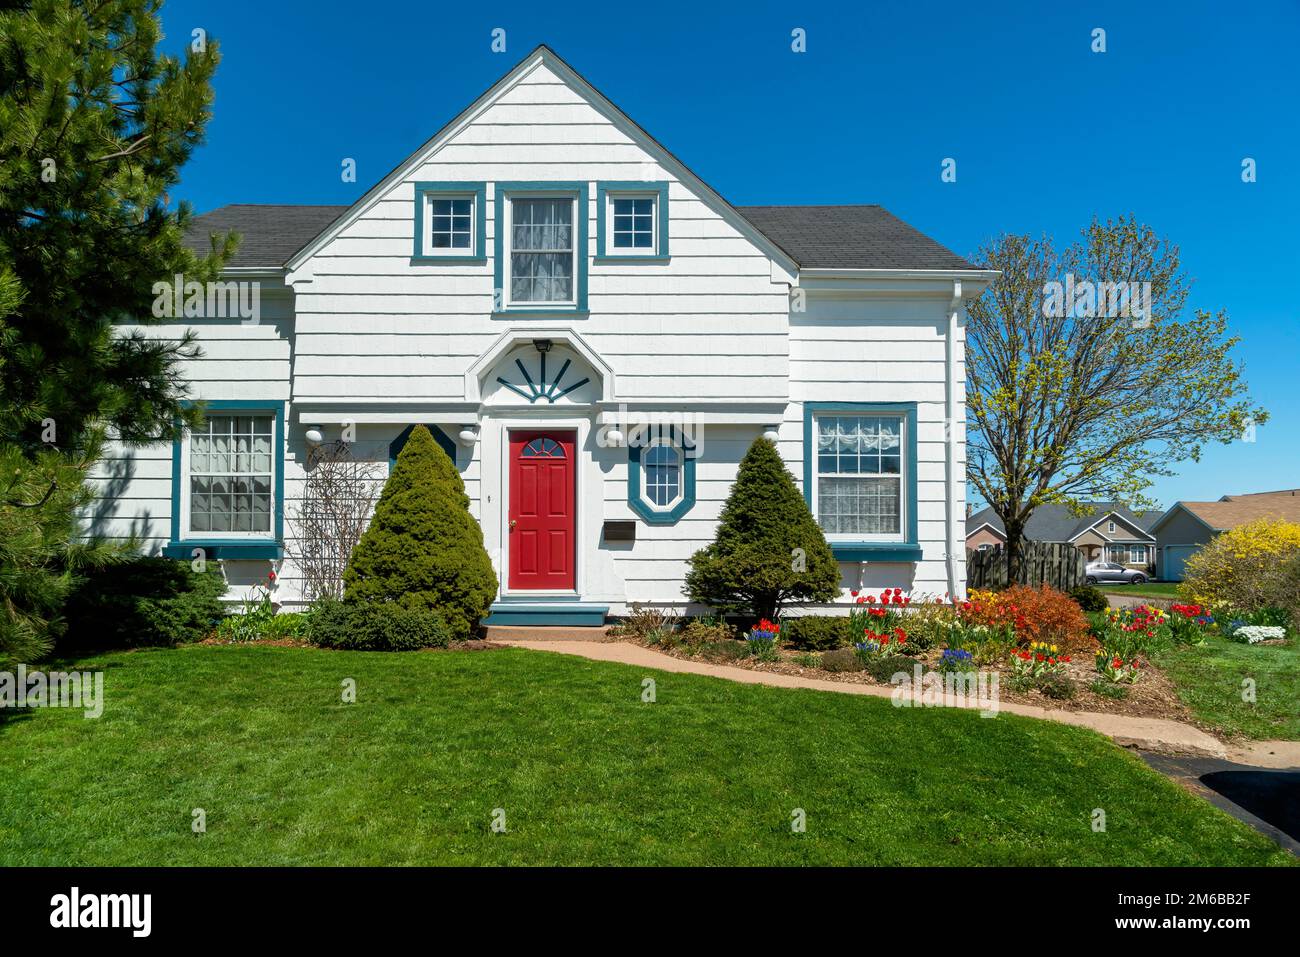 An older style tradional home with flower beds full of springtime flowers. Stock Photo